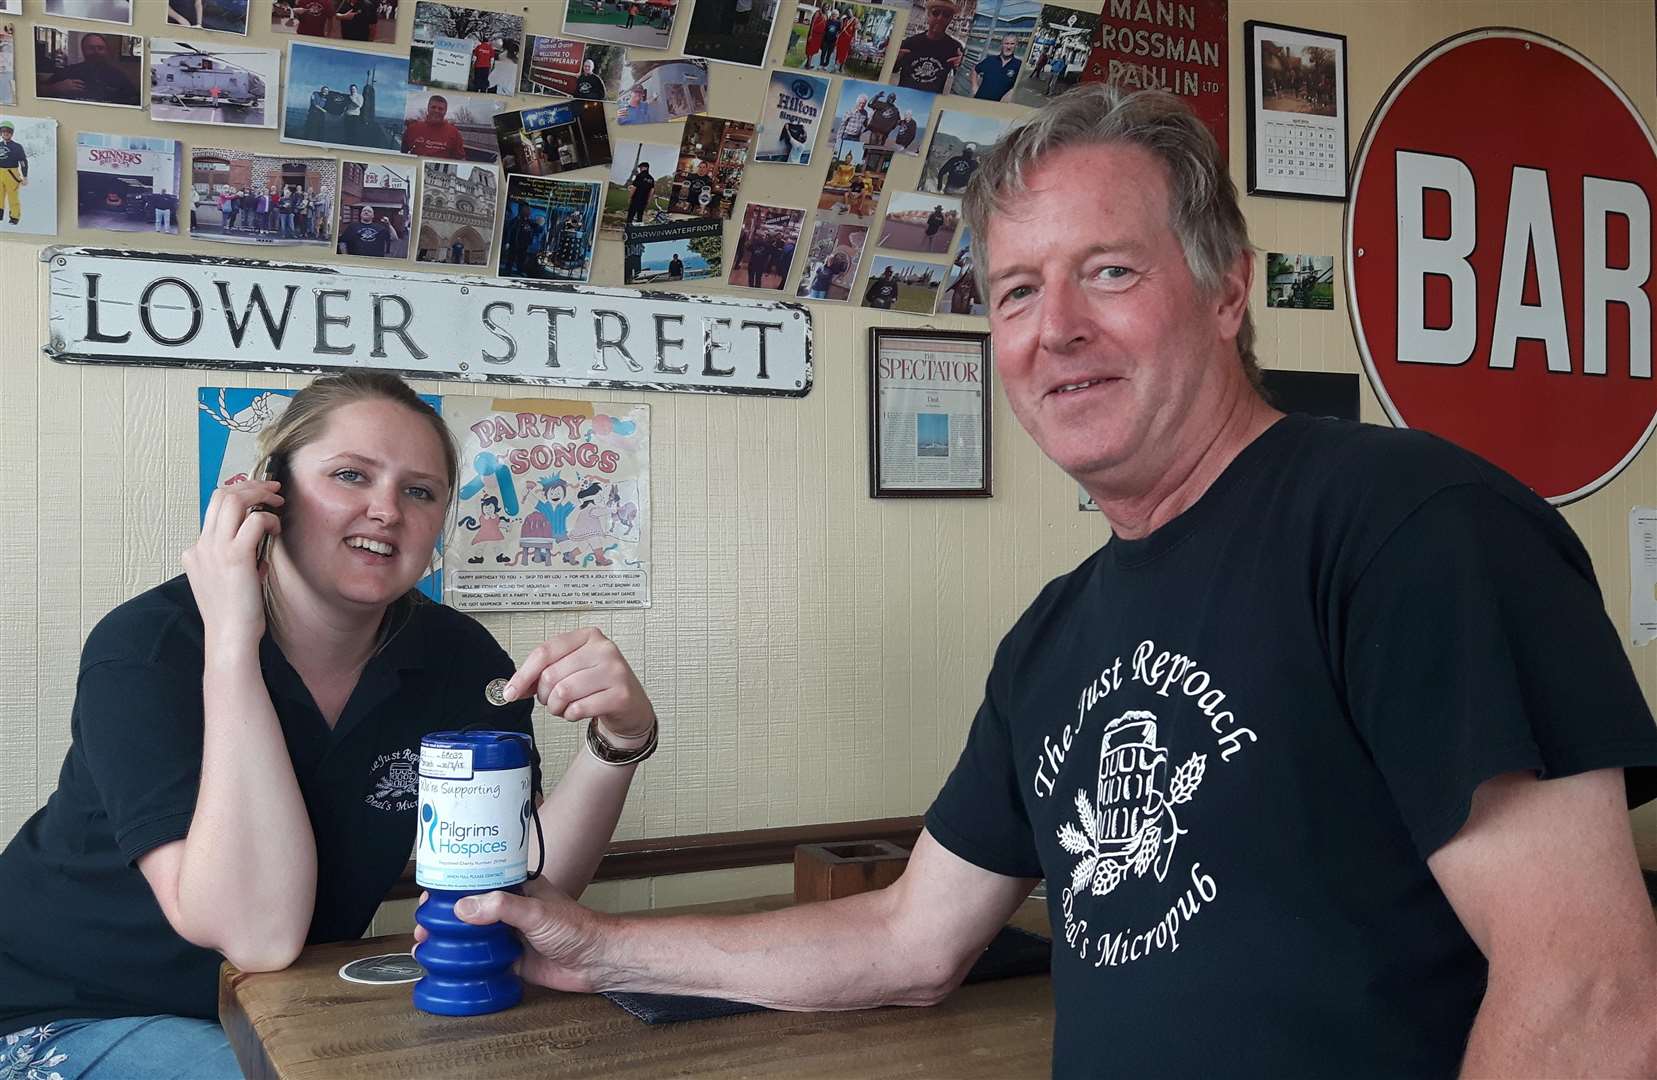 Owners Bronwen and Mark Robson enforce £1 fines if a customer uses their phone inside the micropub (3600957)